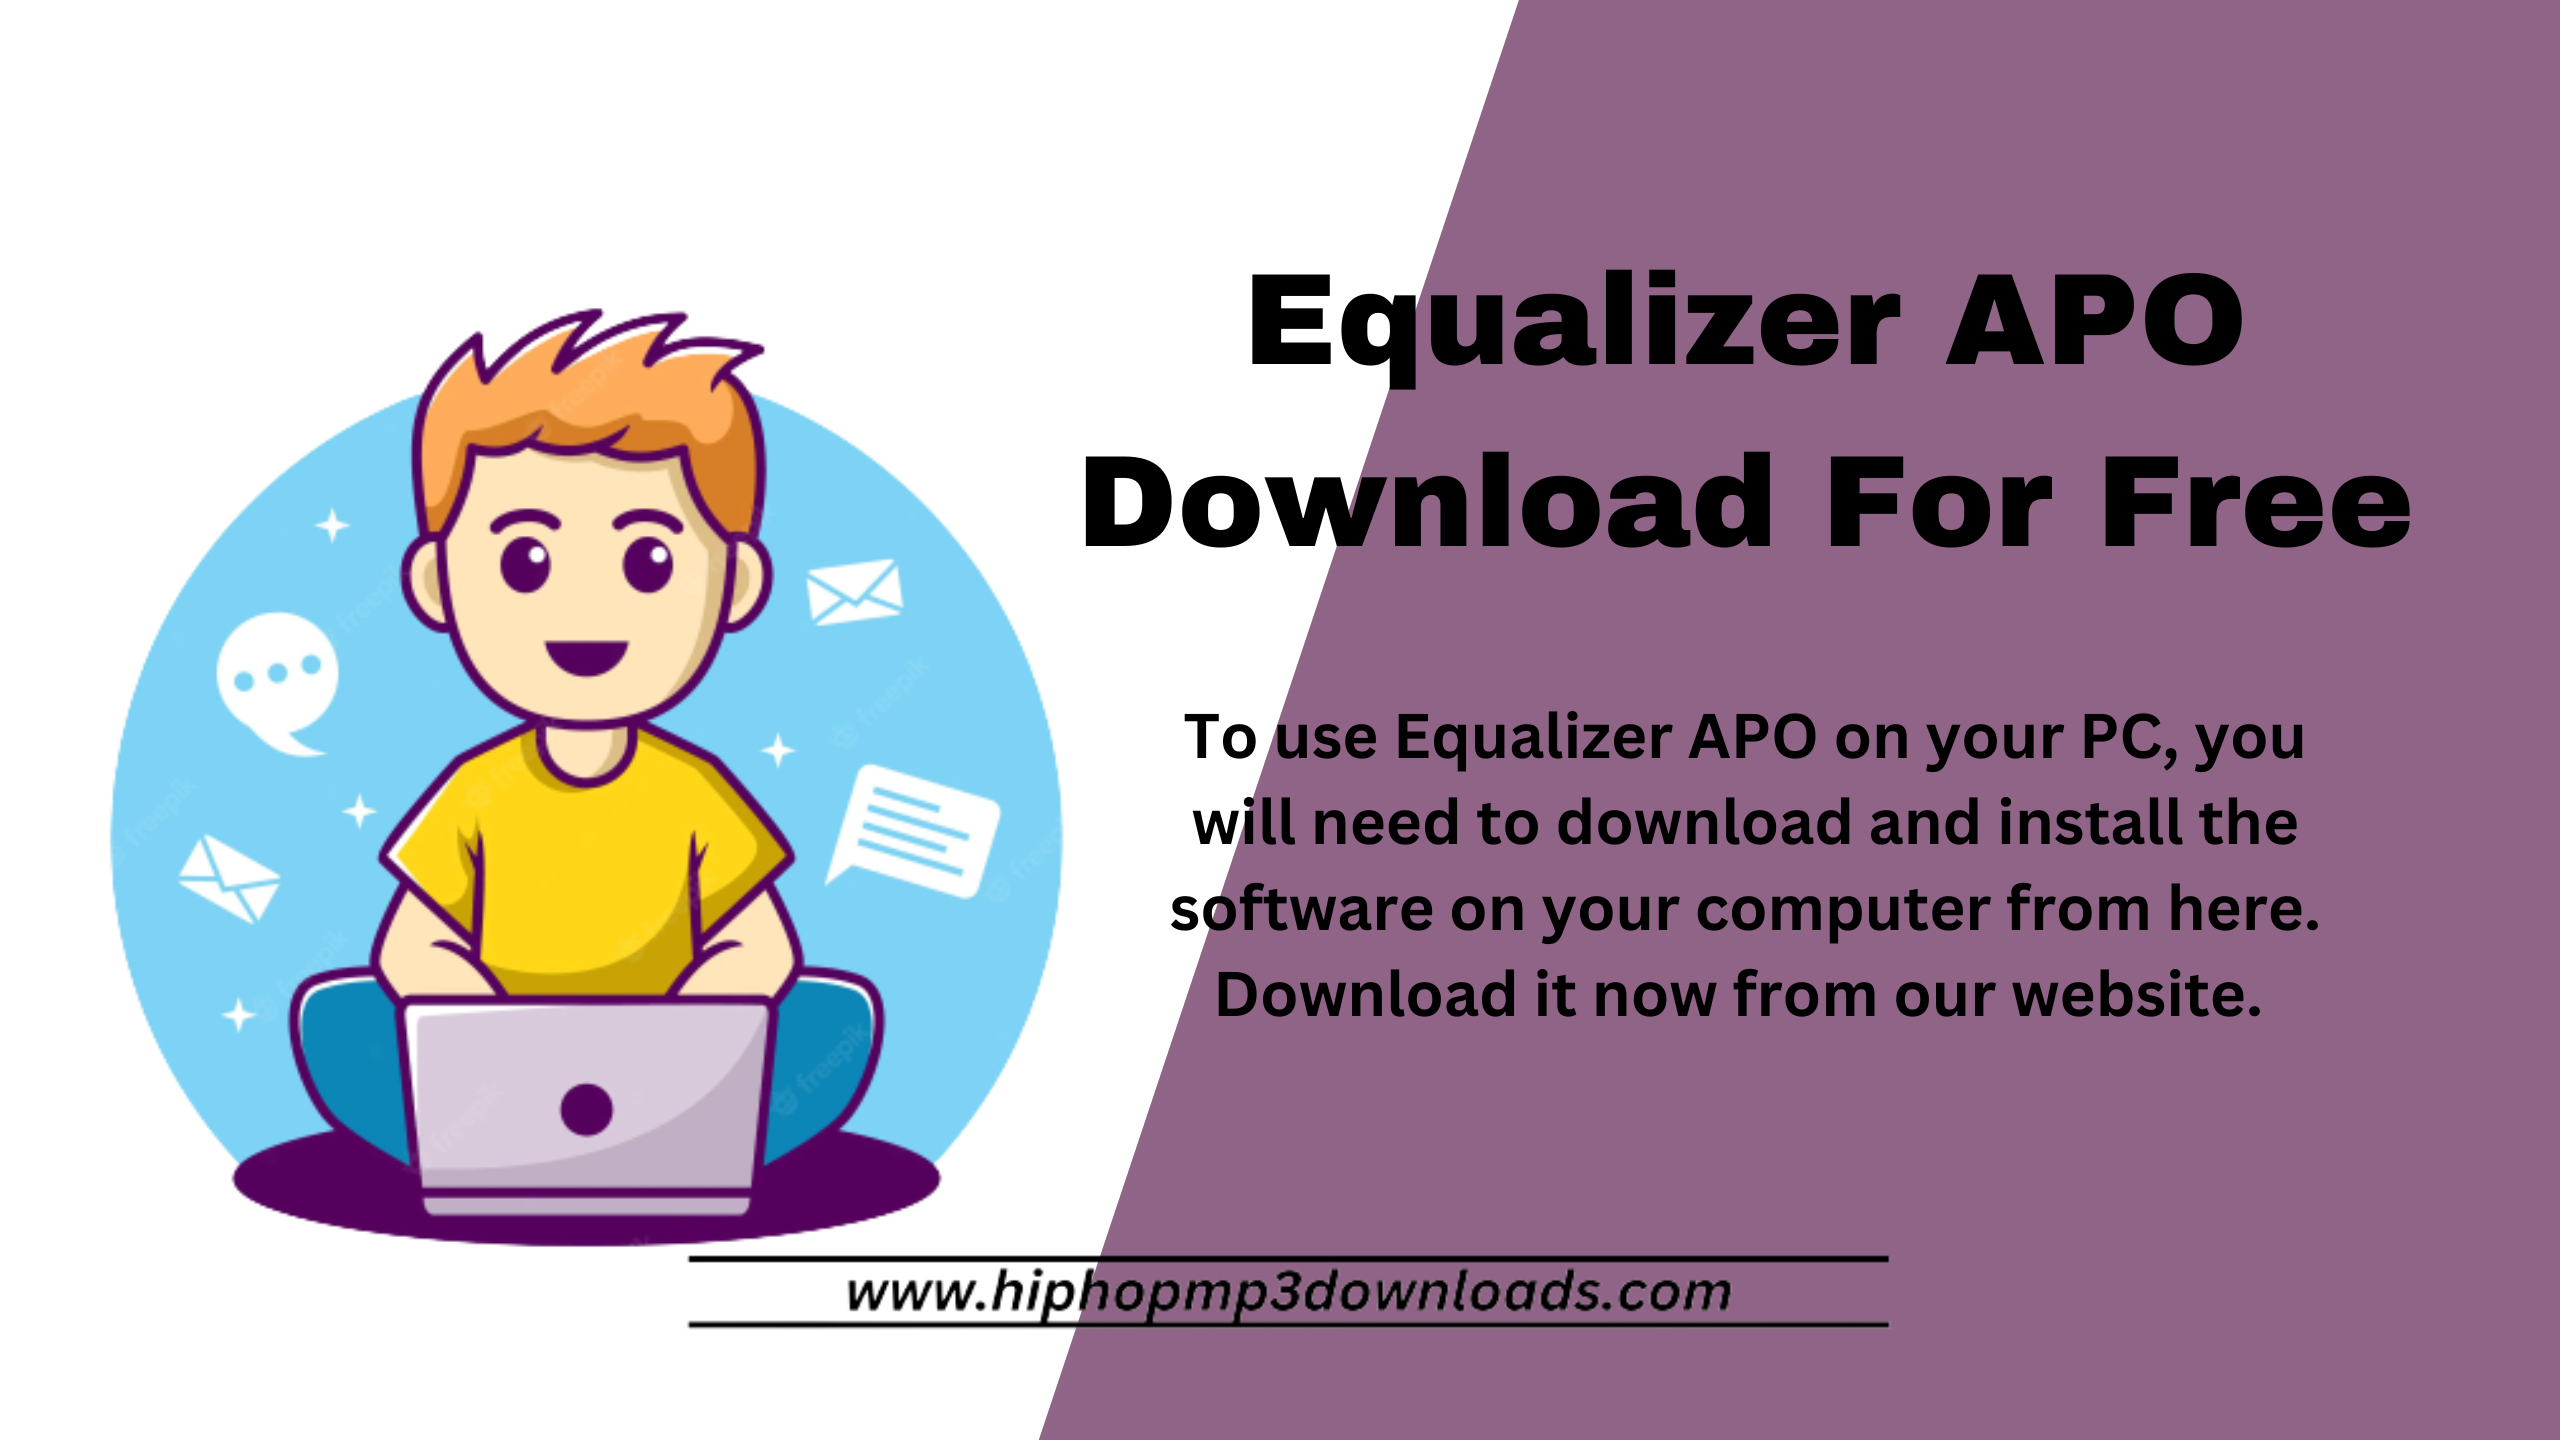 Equalizer APO Download For Free